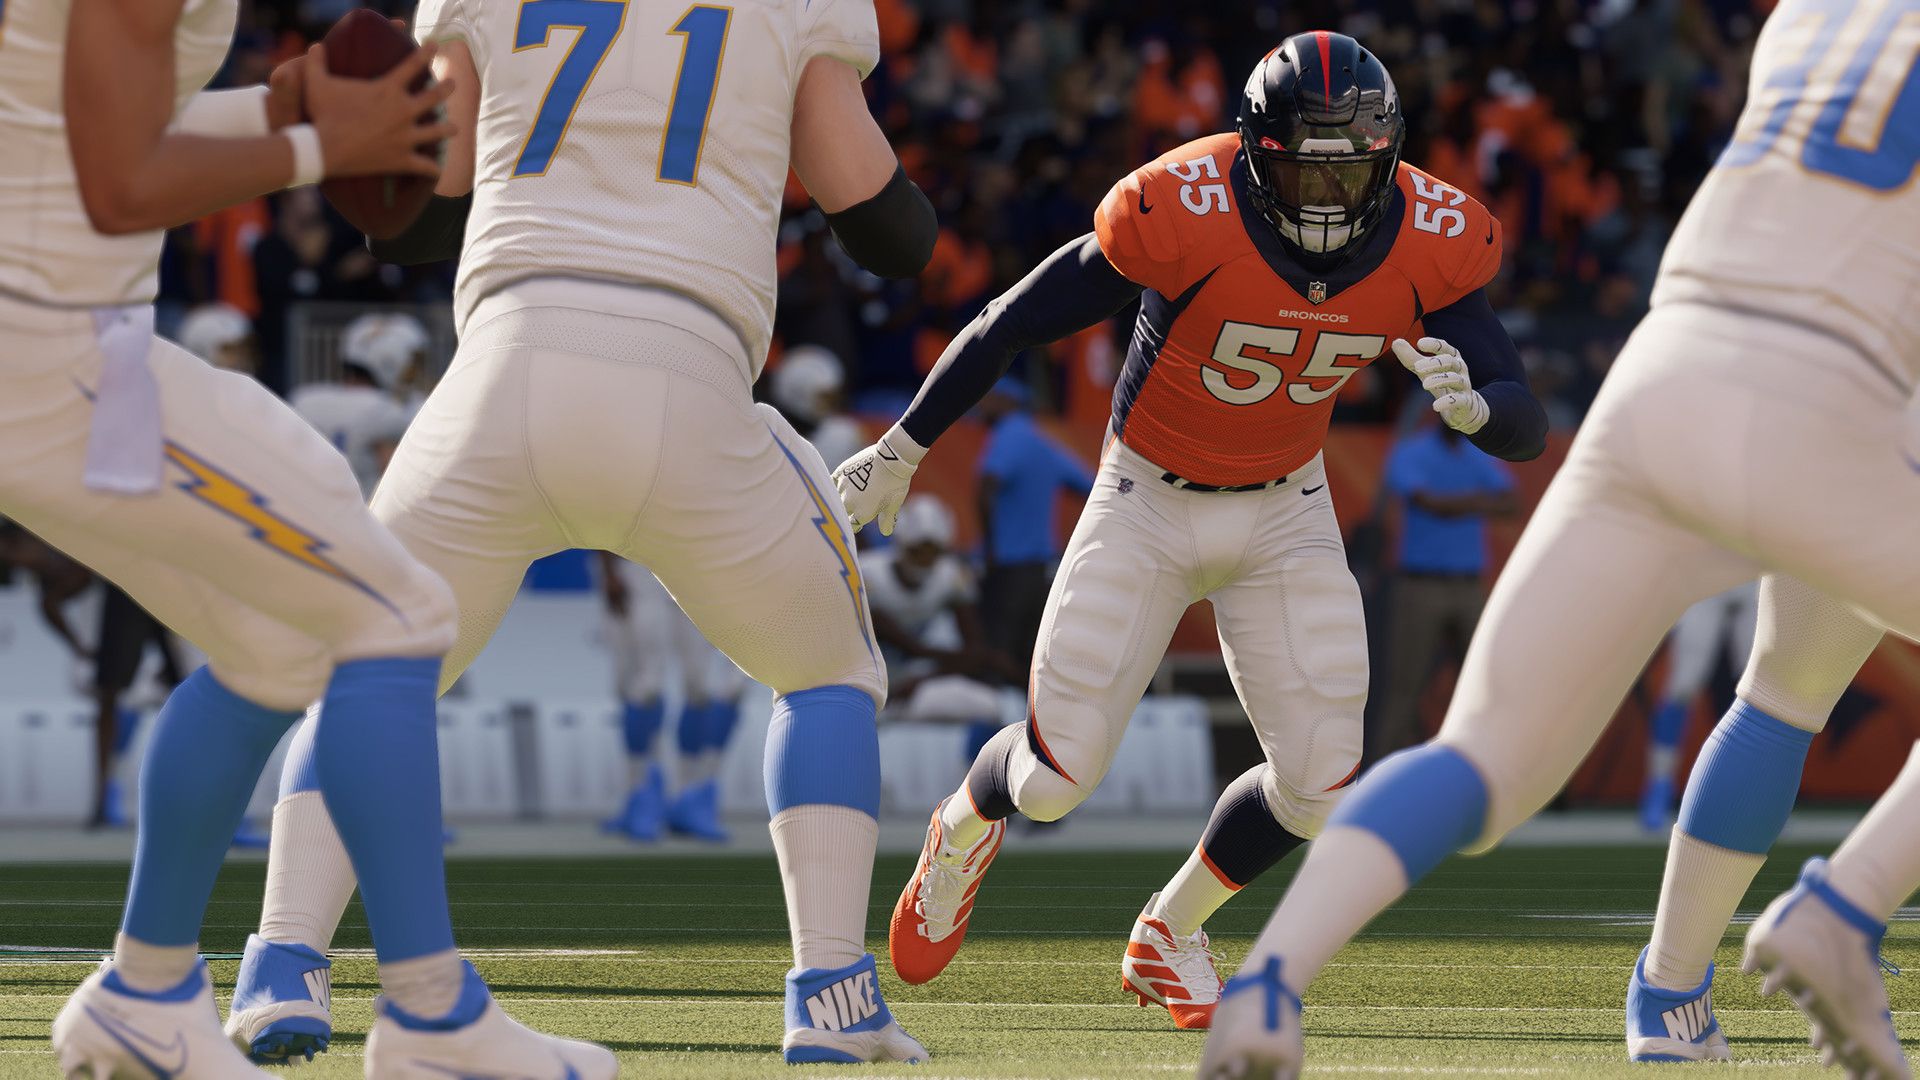 Screenshot of Madden NFL 22 featuring a close-up view of players on the field. 